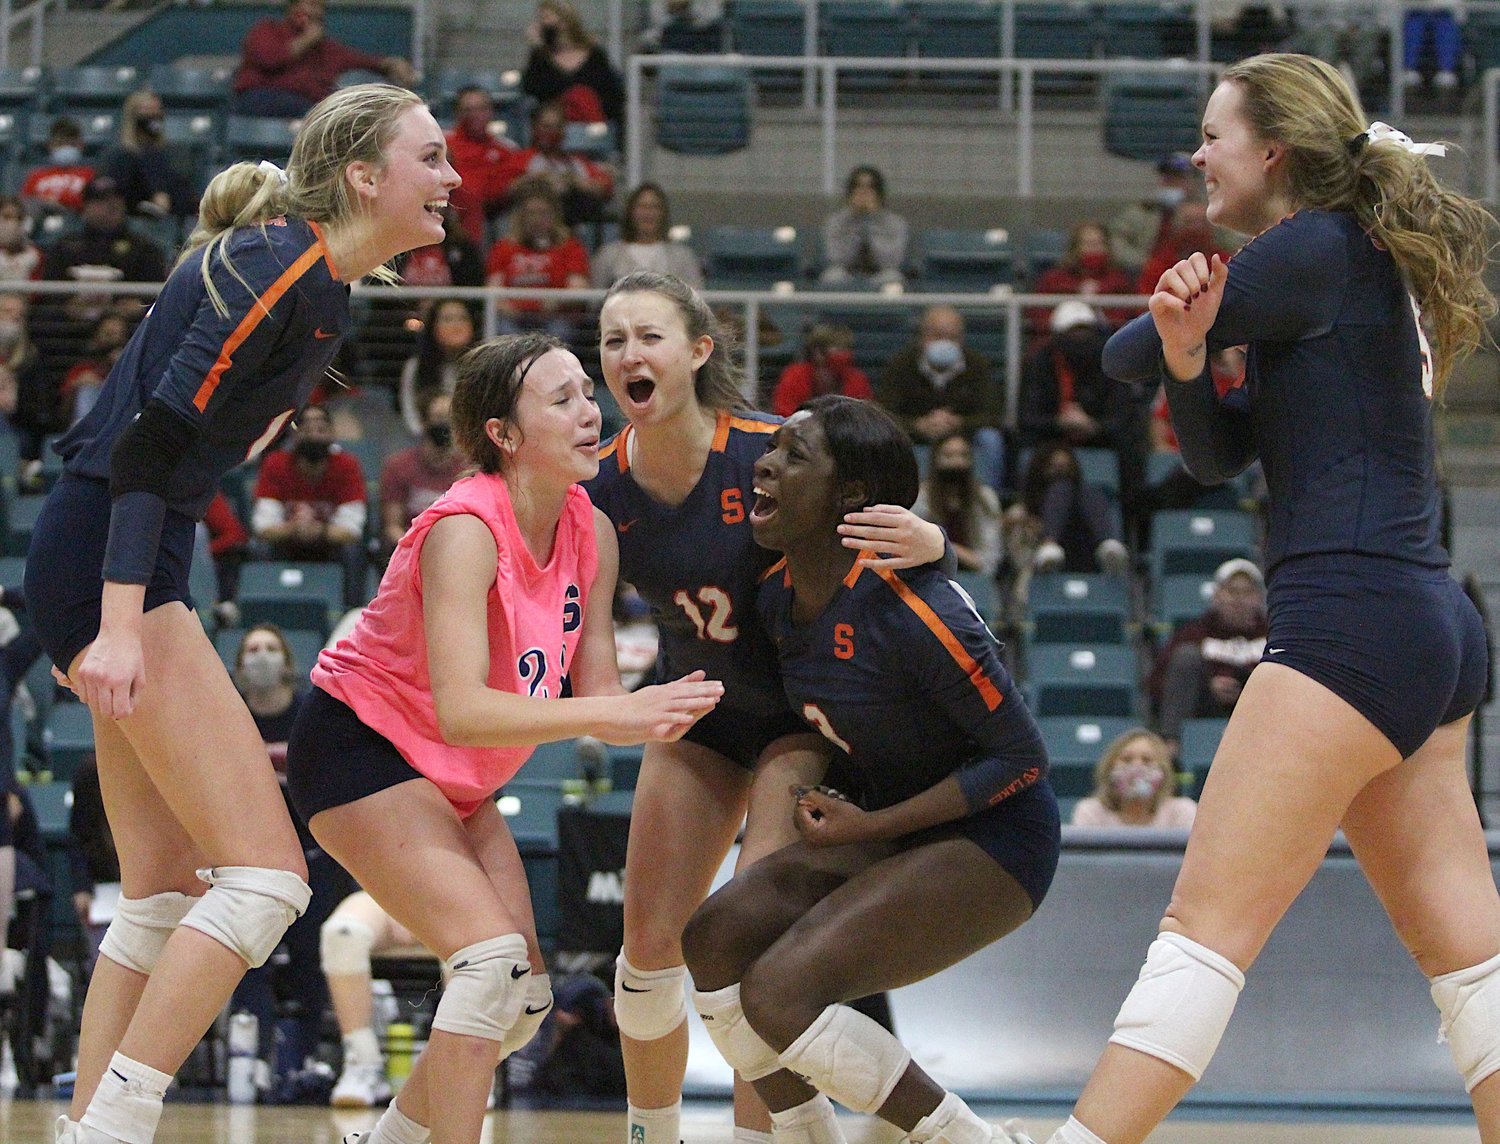 Seven Lakes senior Ally Batenhorst (front left) and junior Casey Batenhorst (front right) are enjoying the Spartans’ remarkable run to the Class 6A state volleyball final. Ally is returning to the state final after making it with her older sister, Dani, in 2017. Now with younger sister Casey, she’s hoping the second time can bring home a state title.